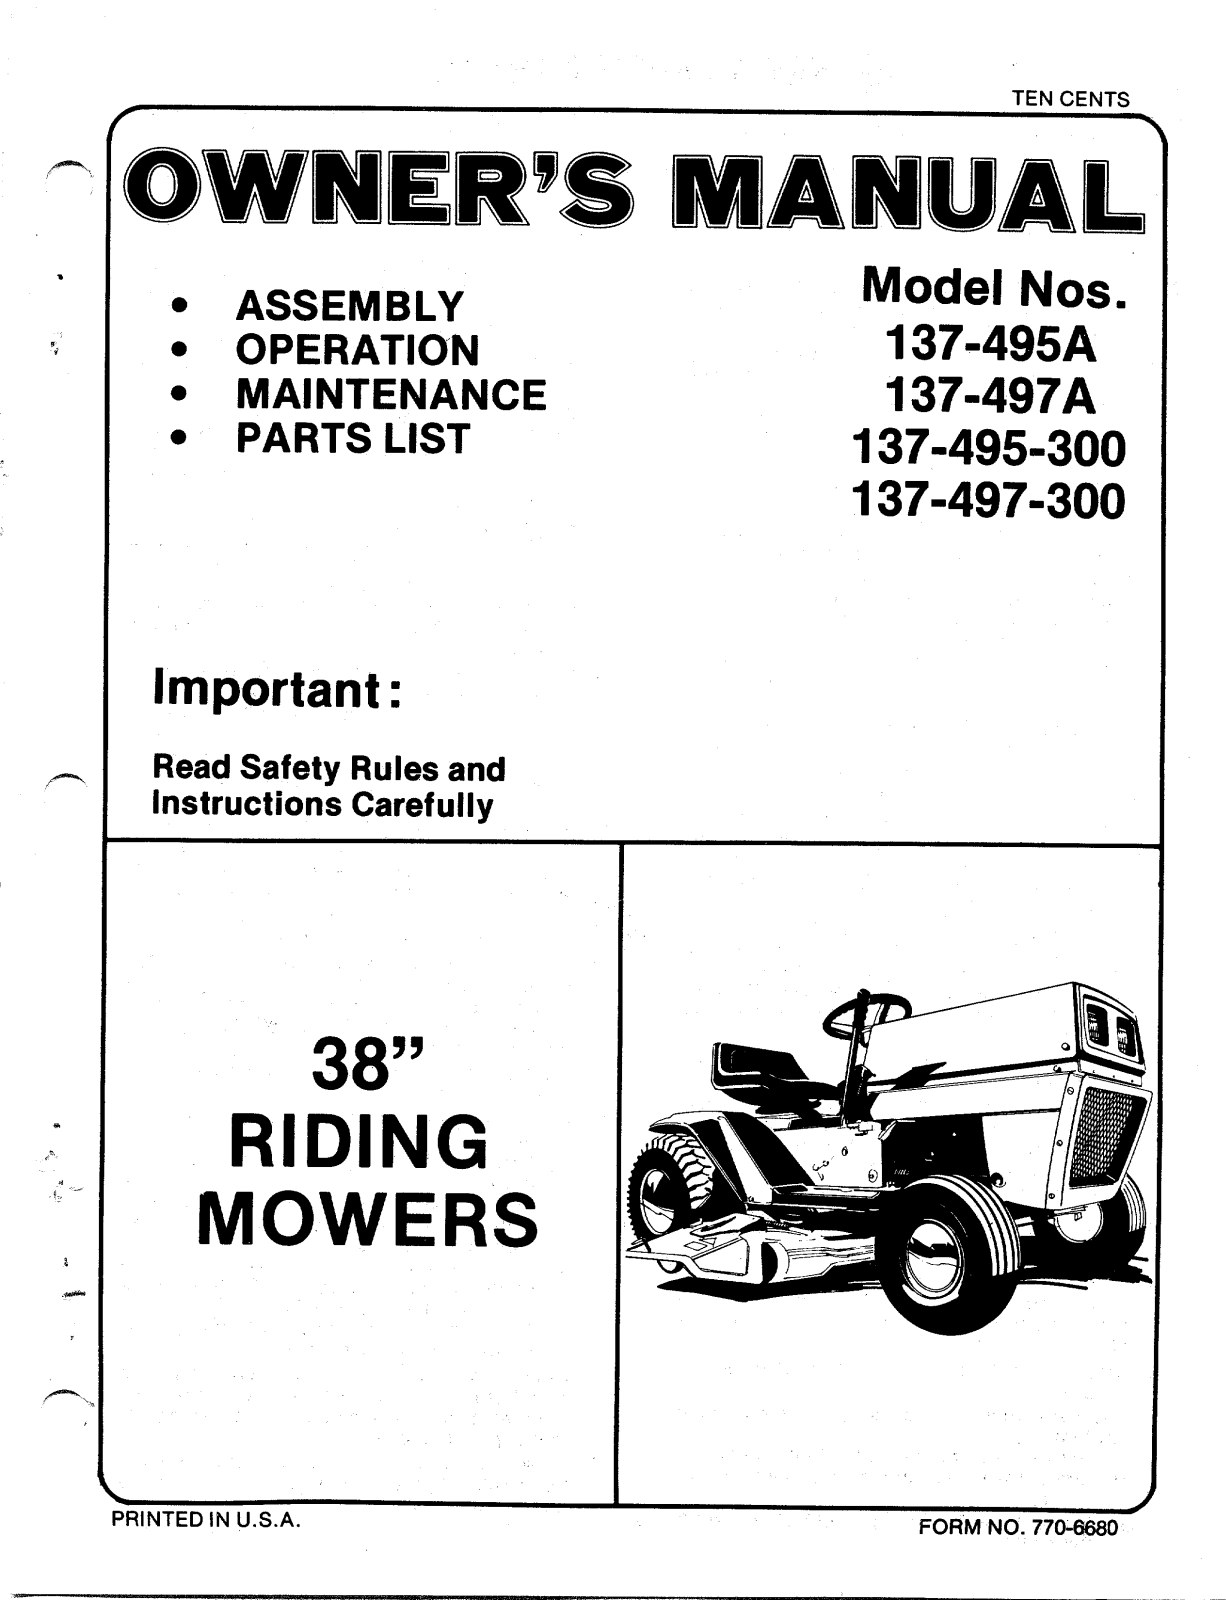 Mtd 137-495a, 137-497a, 137-495-300, 137-497-300 owners Manual